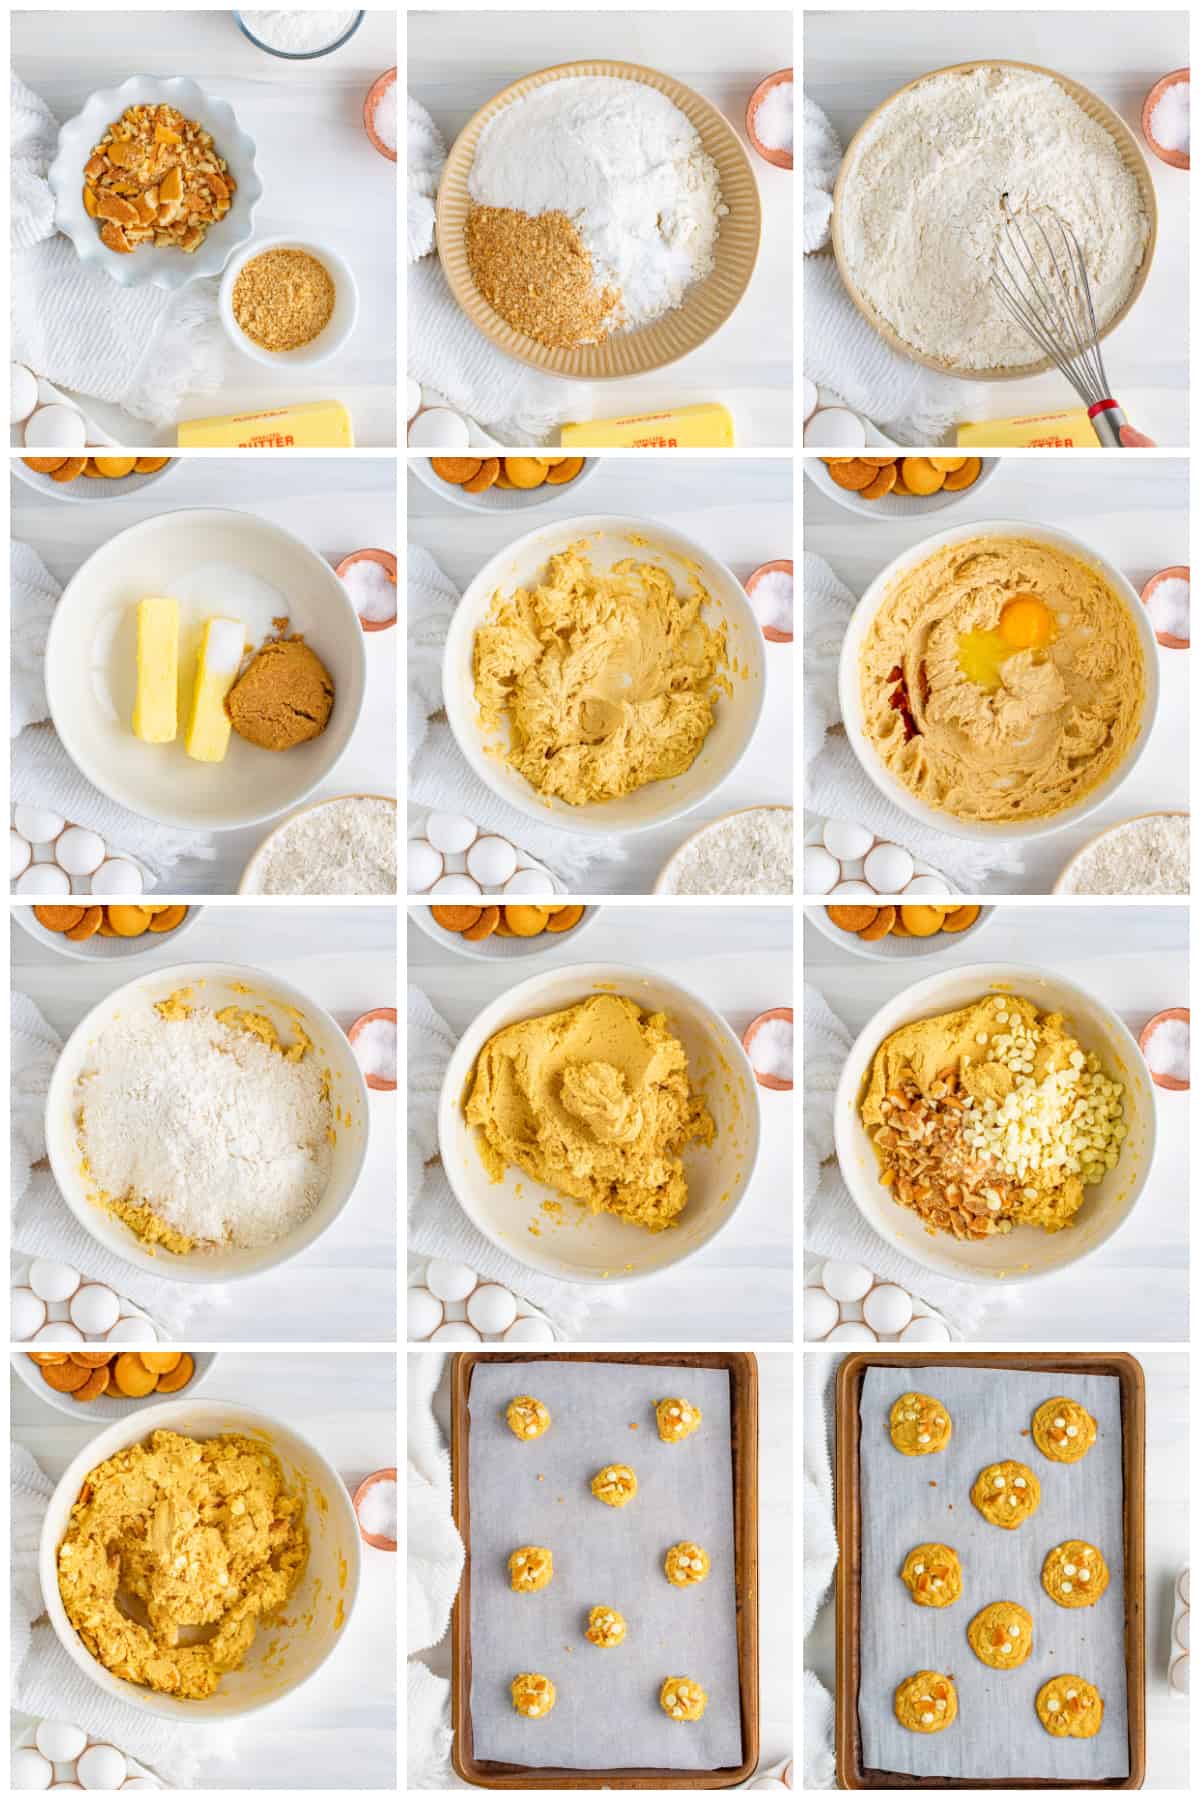 Step by step photos on how to make Banana Pudding Cookies.